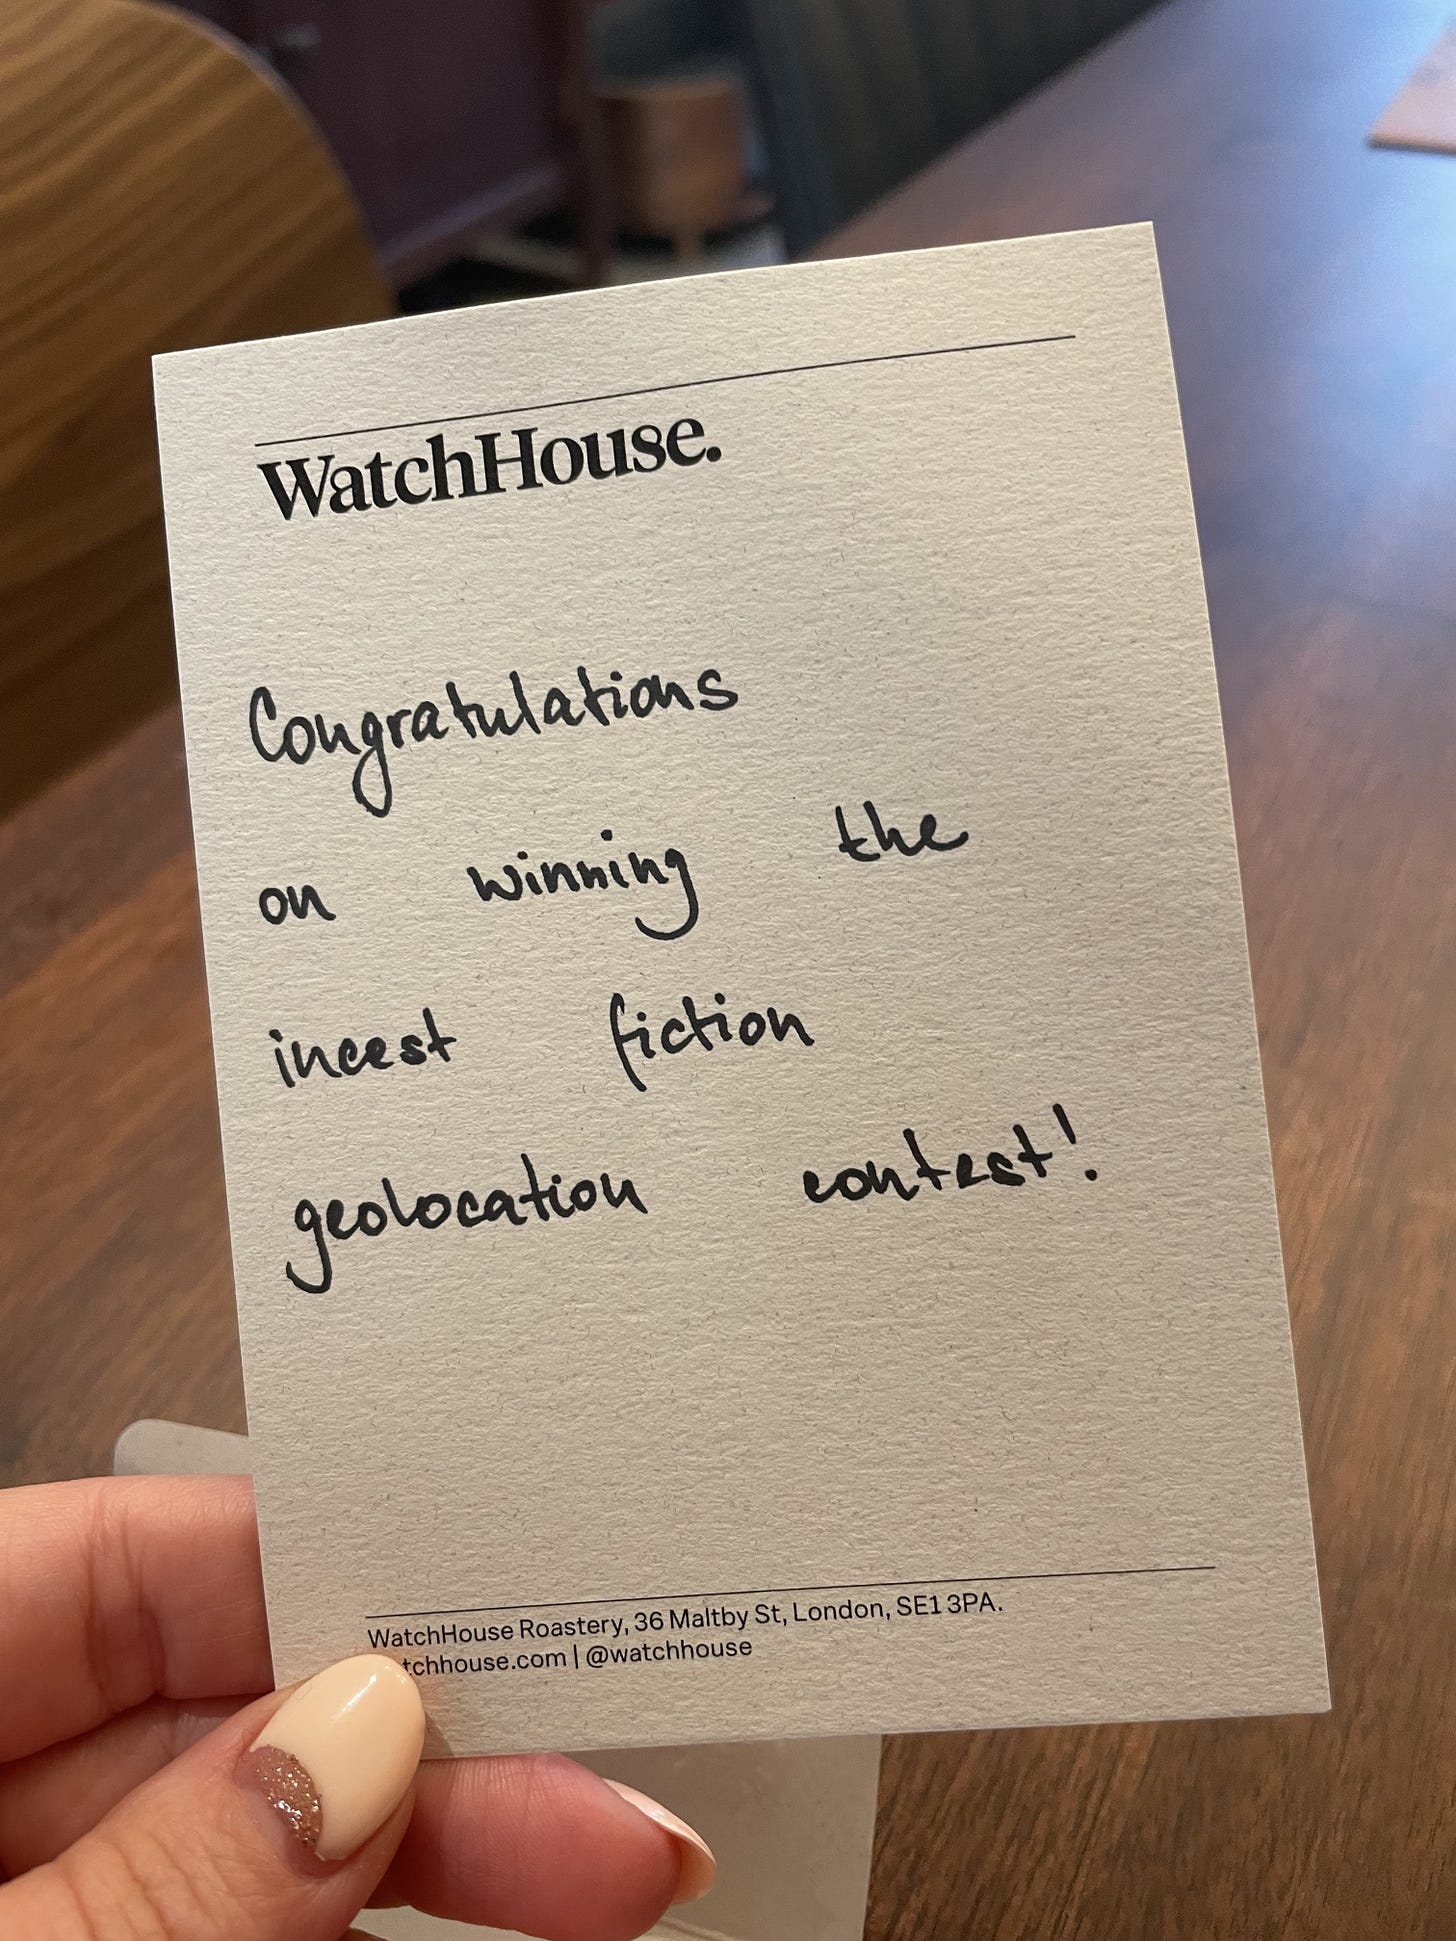 Handwritten note saying "Congratulations on winning the incest fiction geolocation contest!"